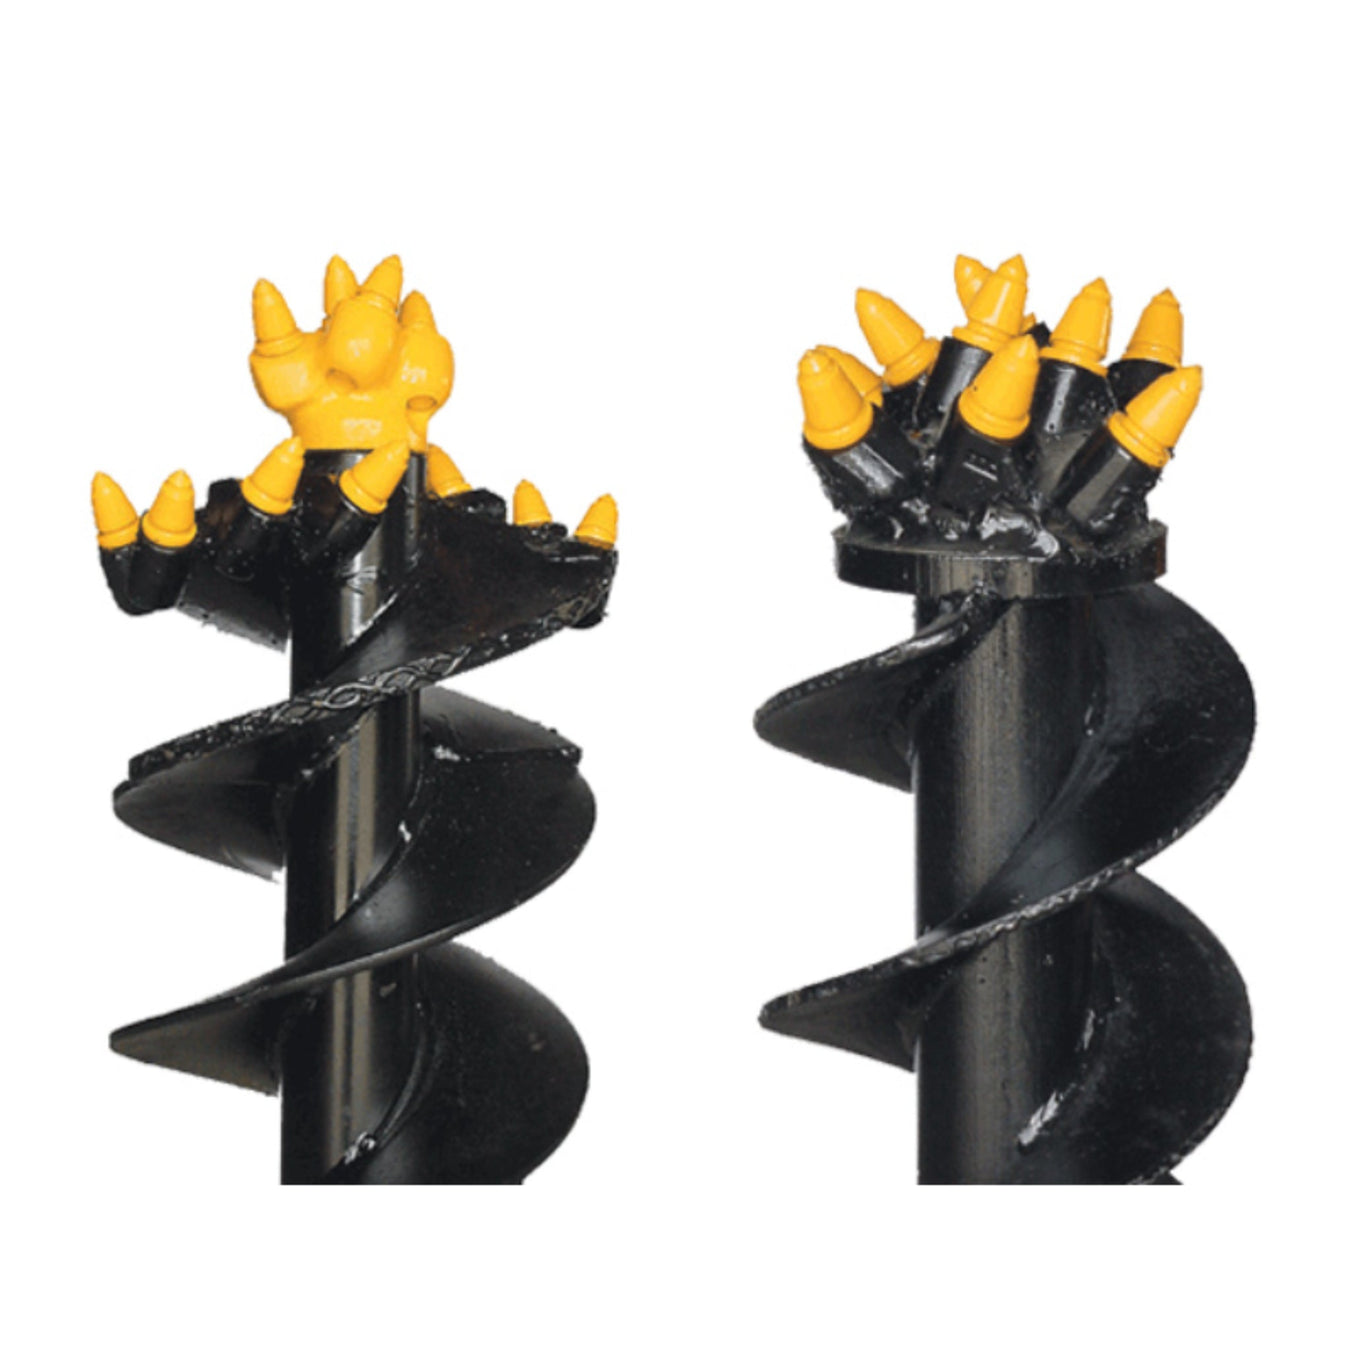 Skid Steer Auger Bits - Attachments King